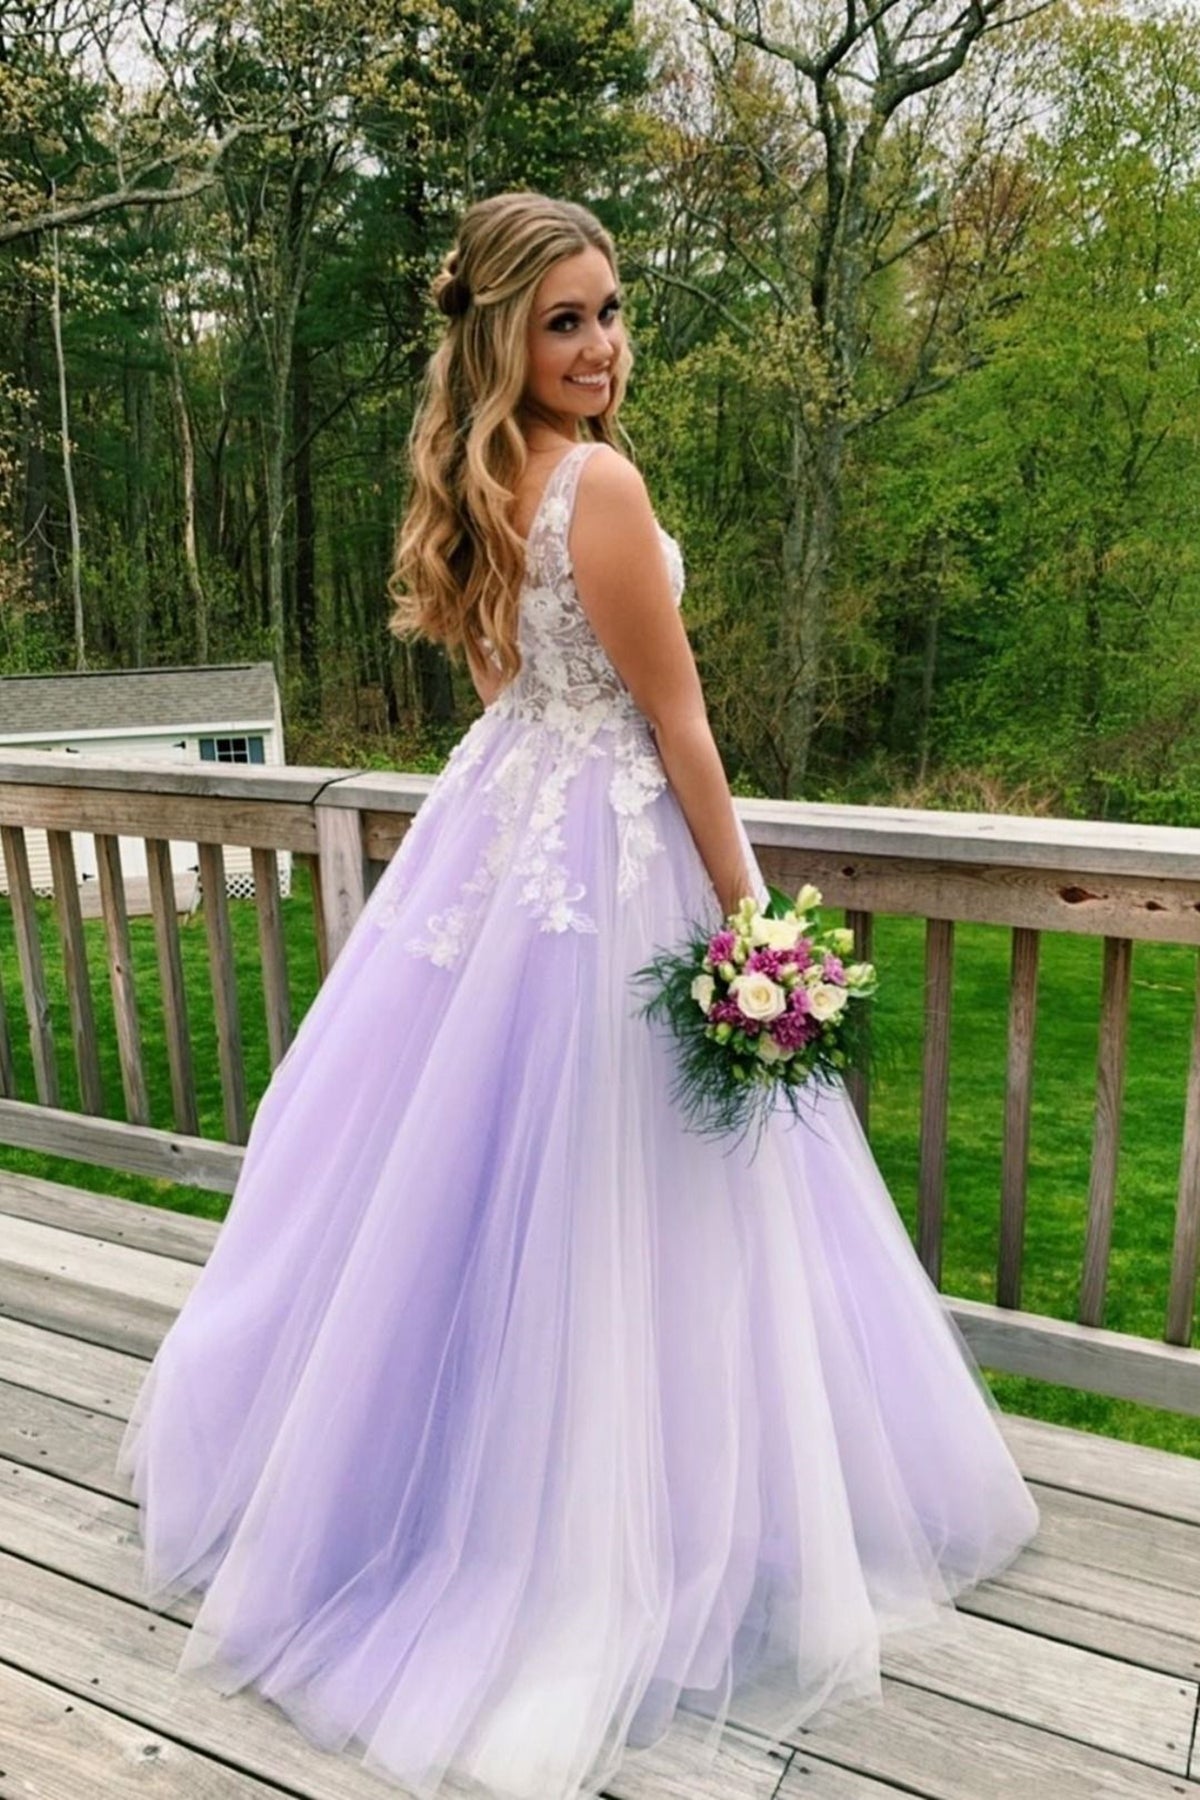 White to Purple Ombre Satin and Organza V-cut Ball Gown - Lunss